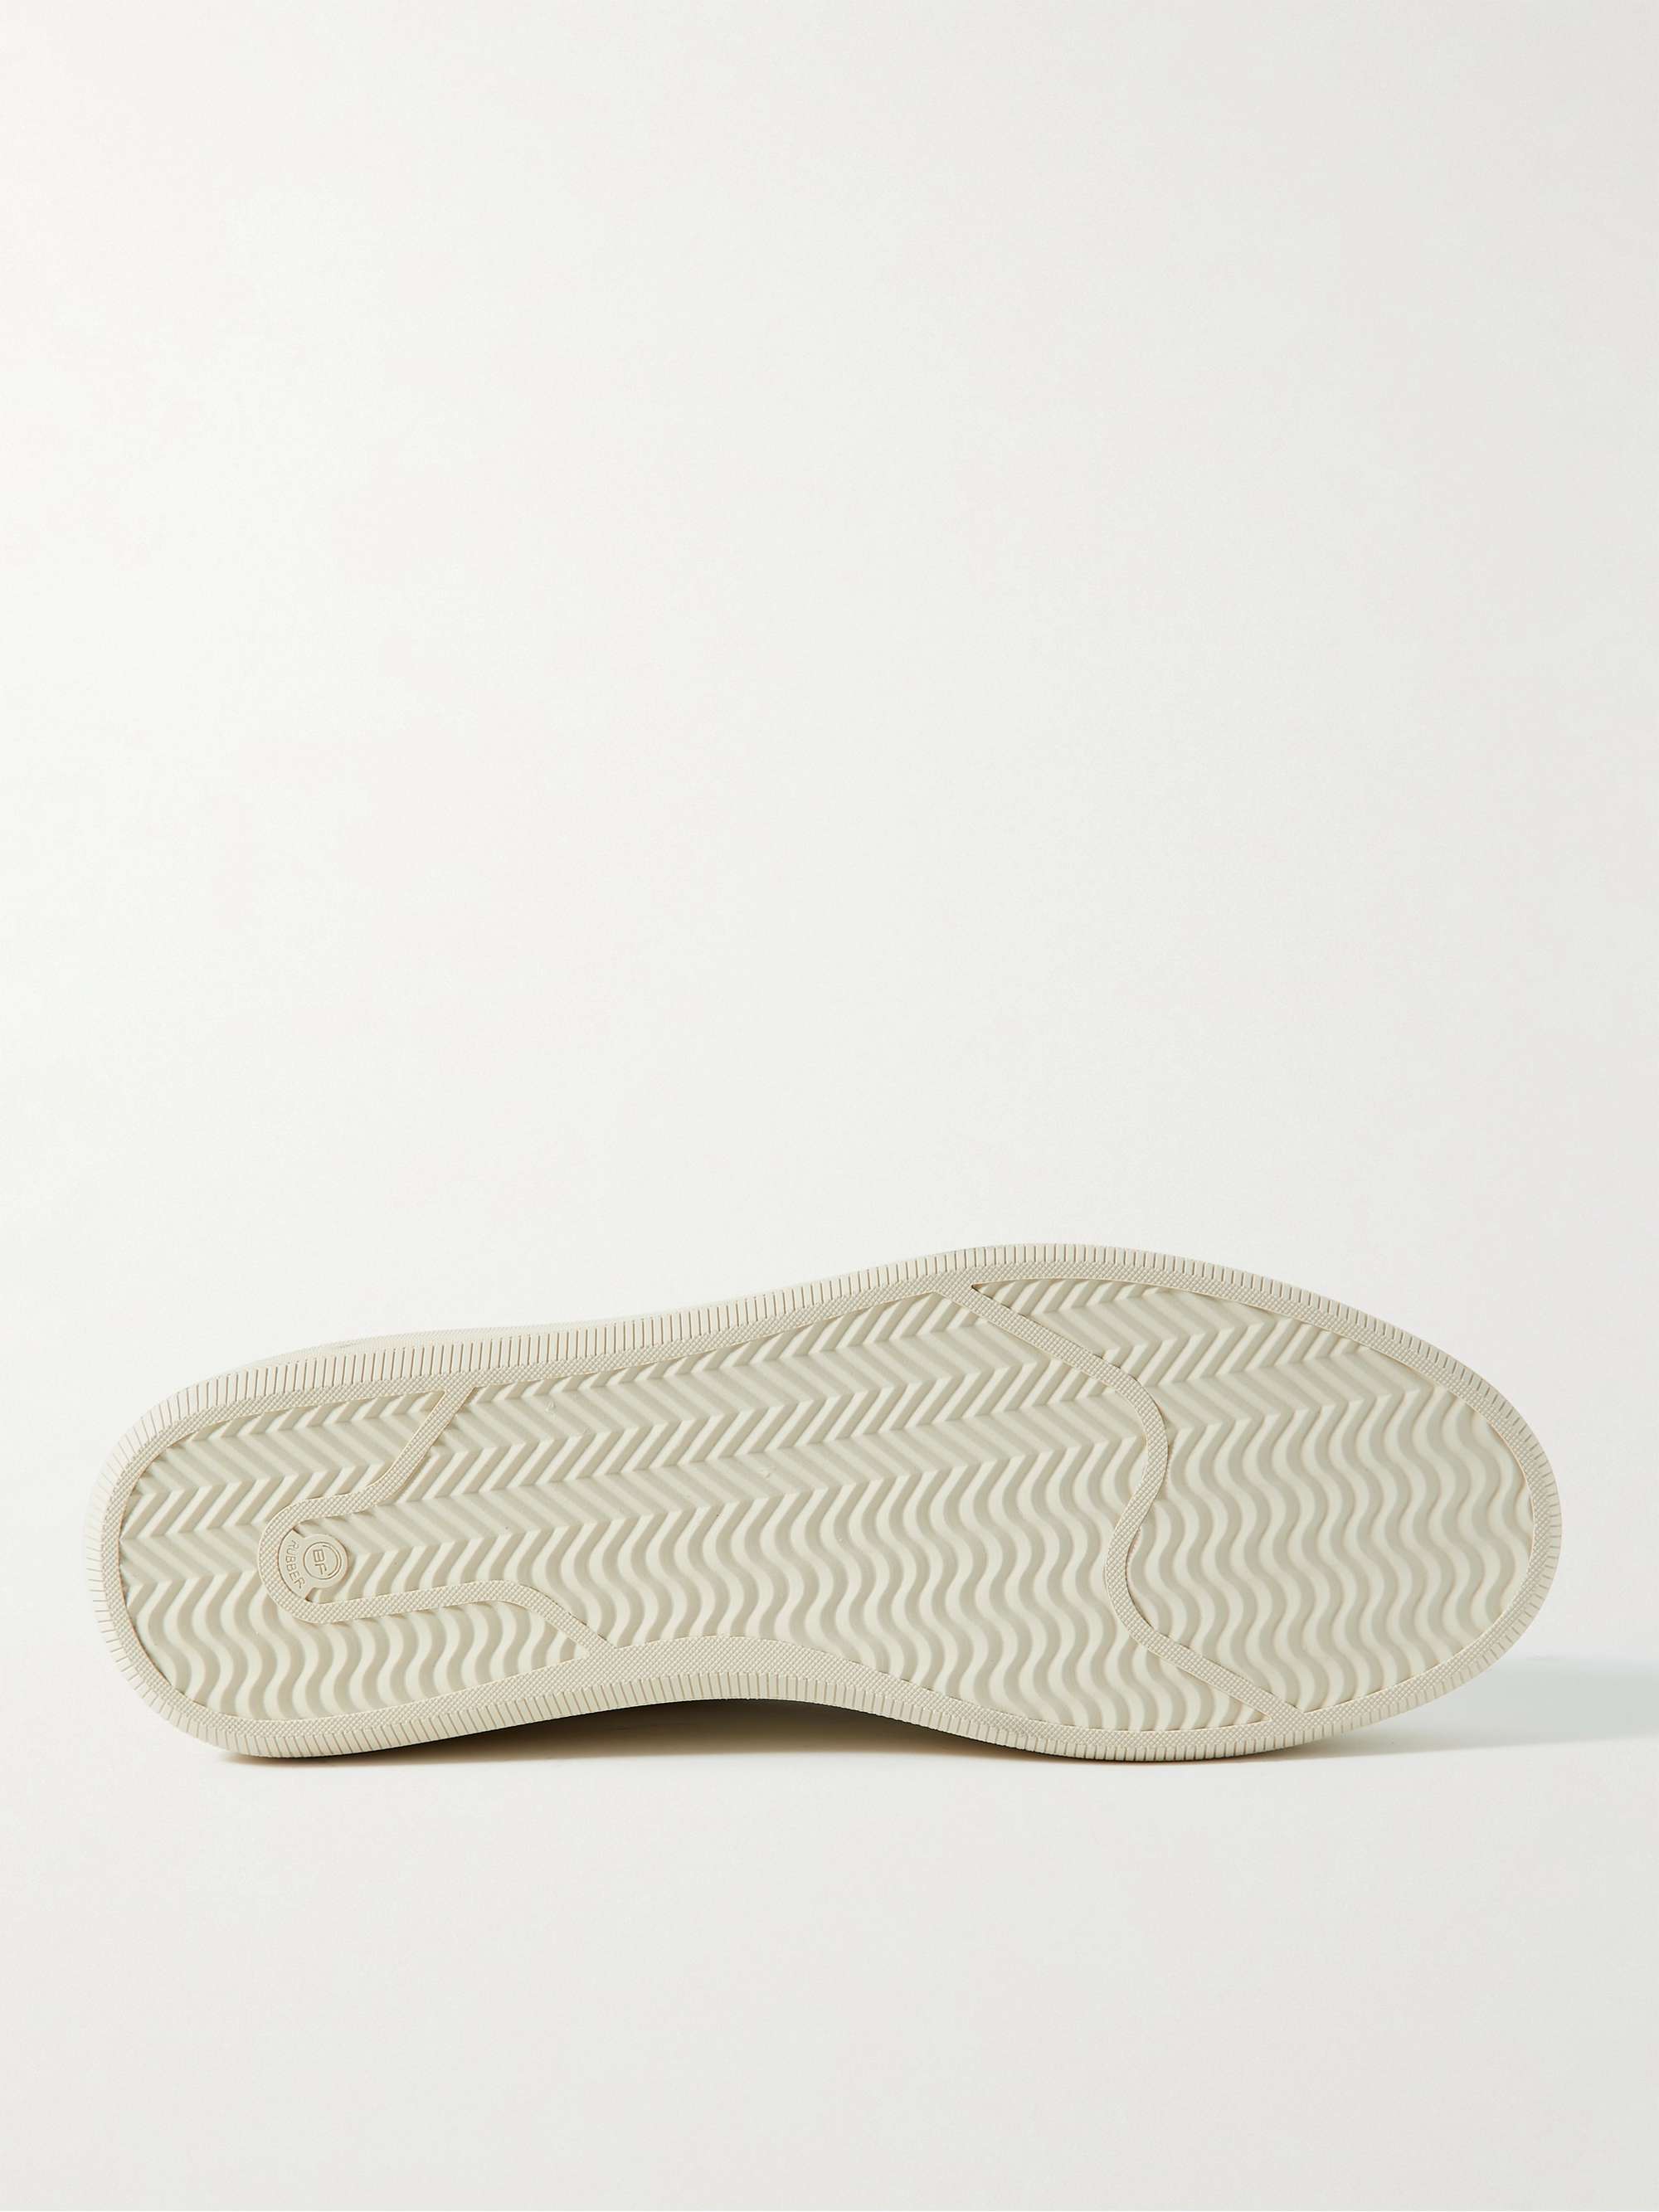 BELSTAFF Track Logo-Perforated Leather Sneakers